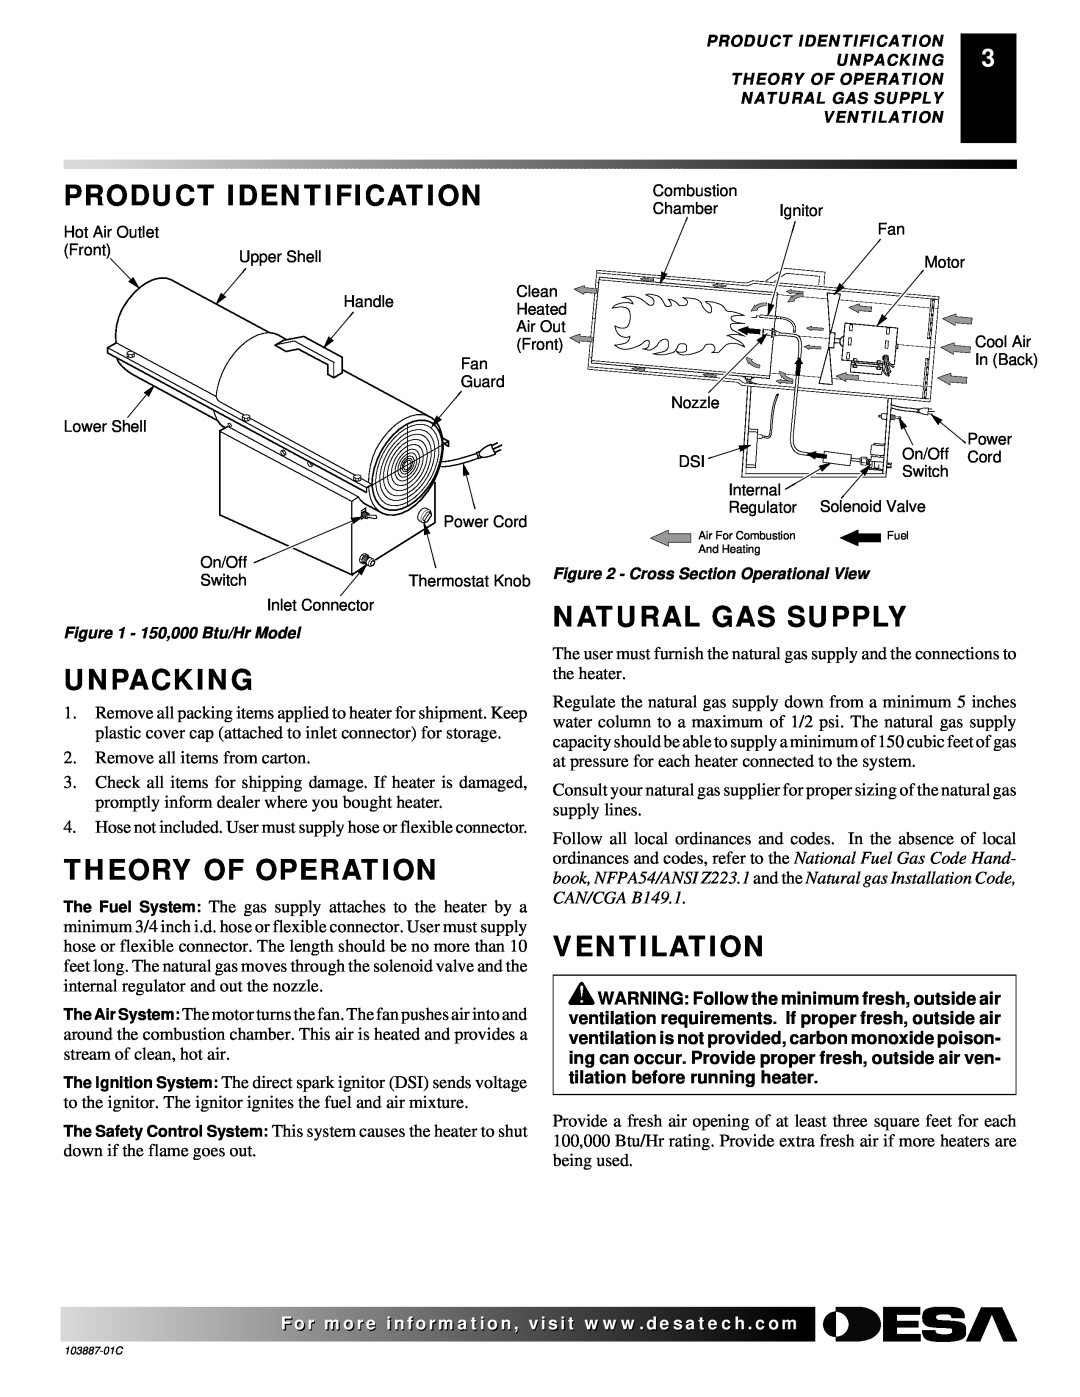 Desa BNG150T owner manual Product Identification, Natural Gas Supply, Unpacking, Theory Of Operation, Ventilation 